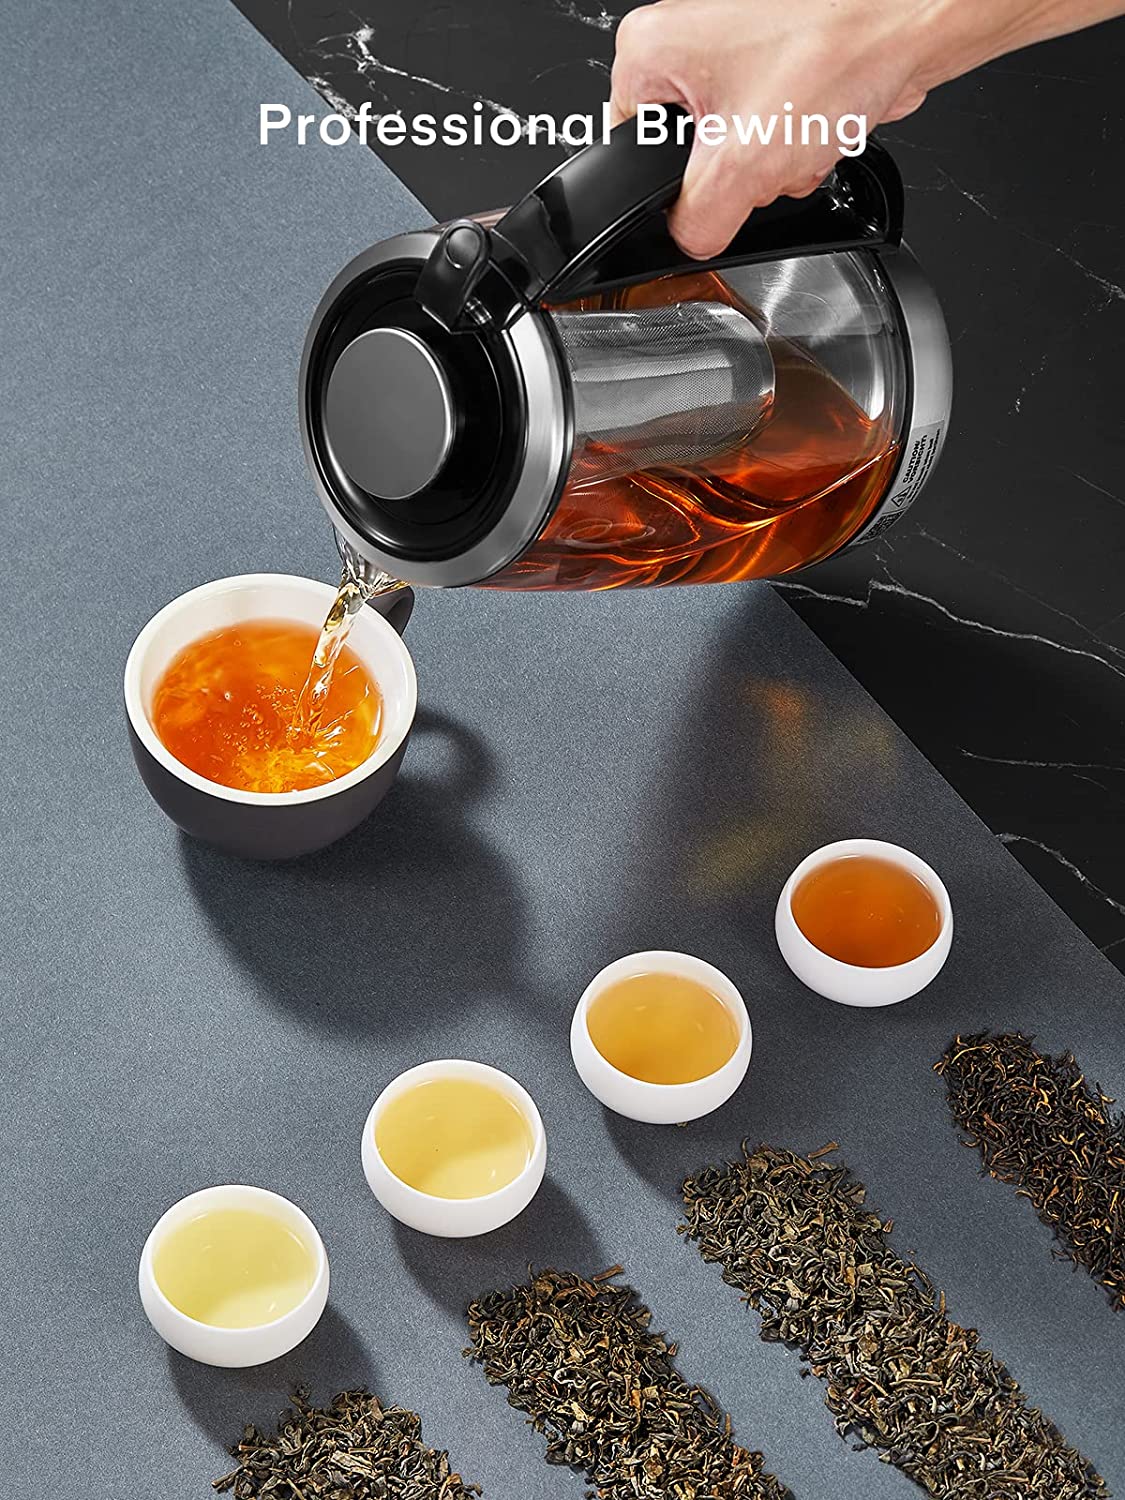 Hot Sale Tea Pot Borosilicate Glass with 304 Stainless Steel